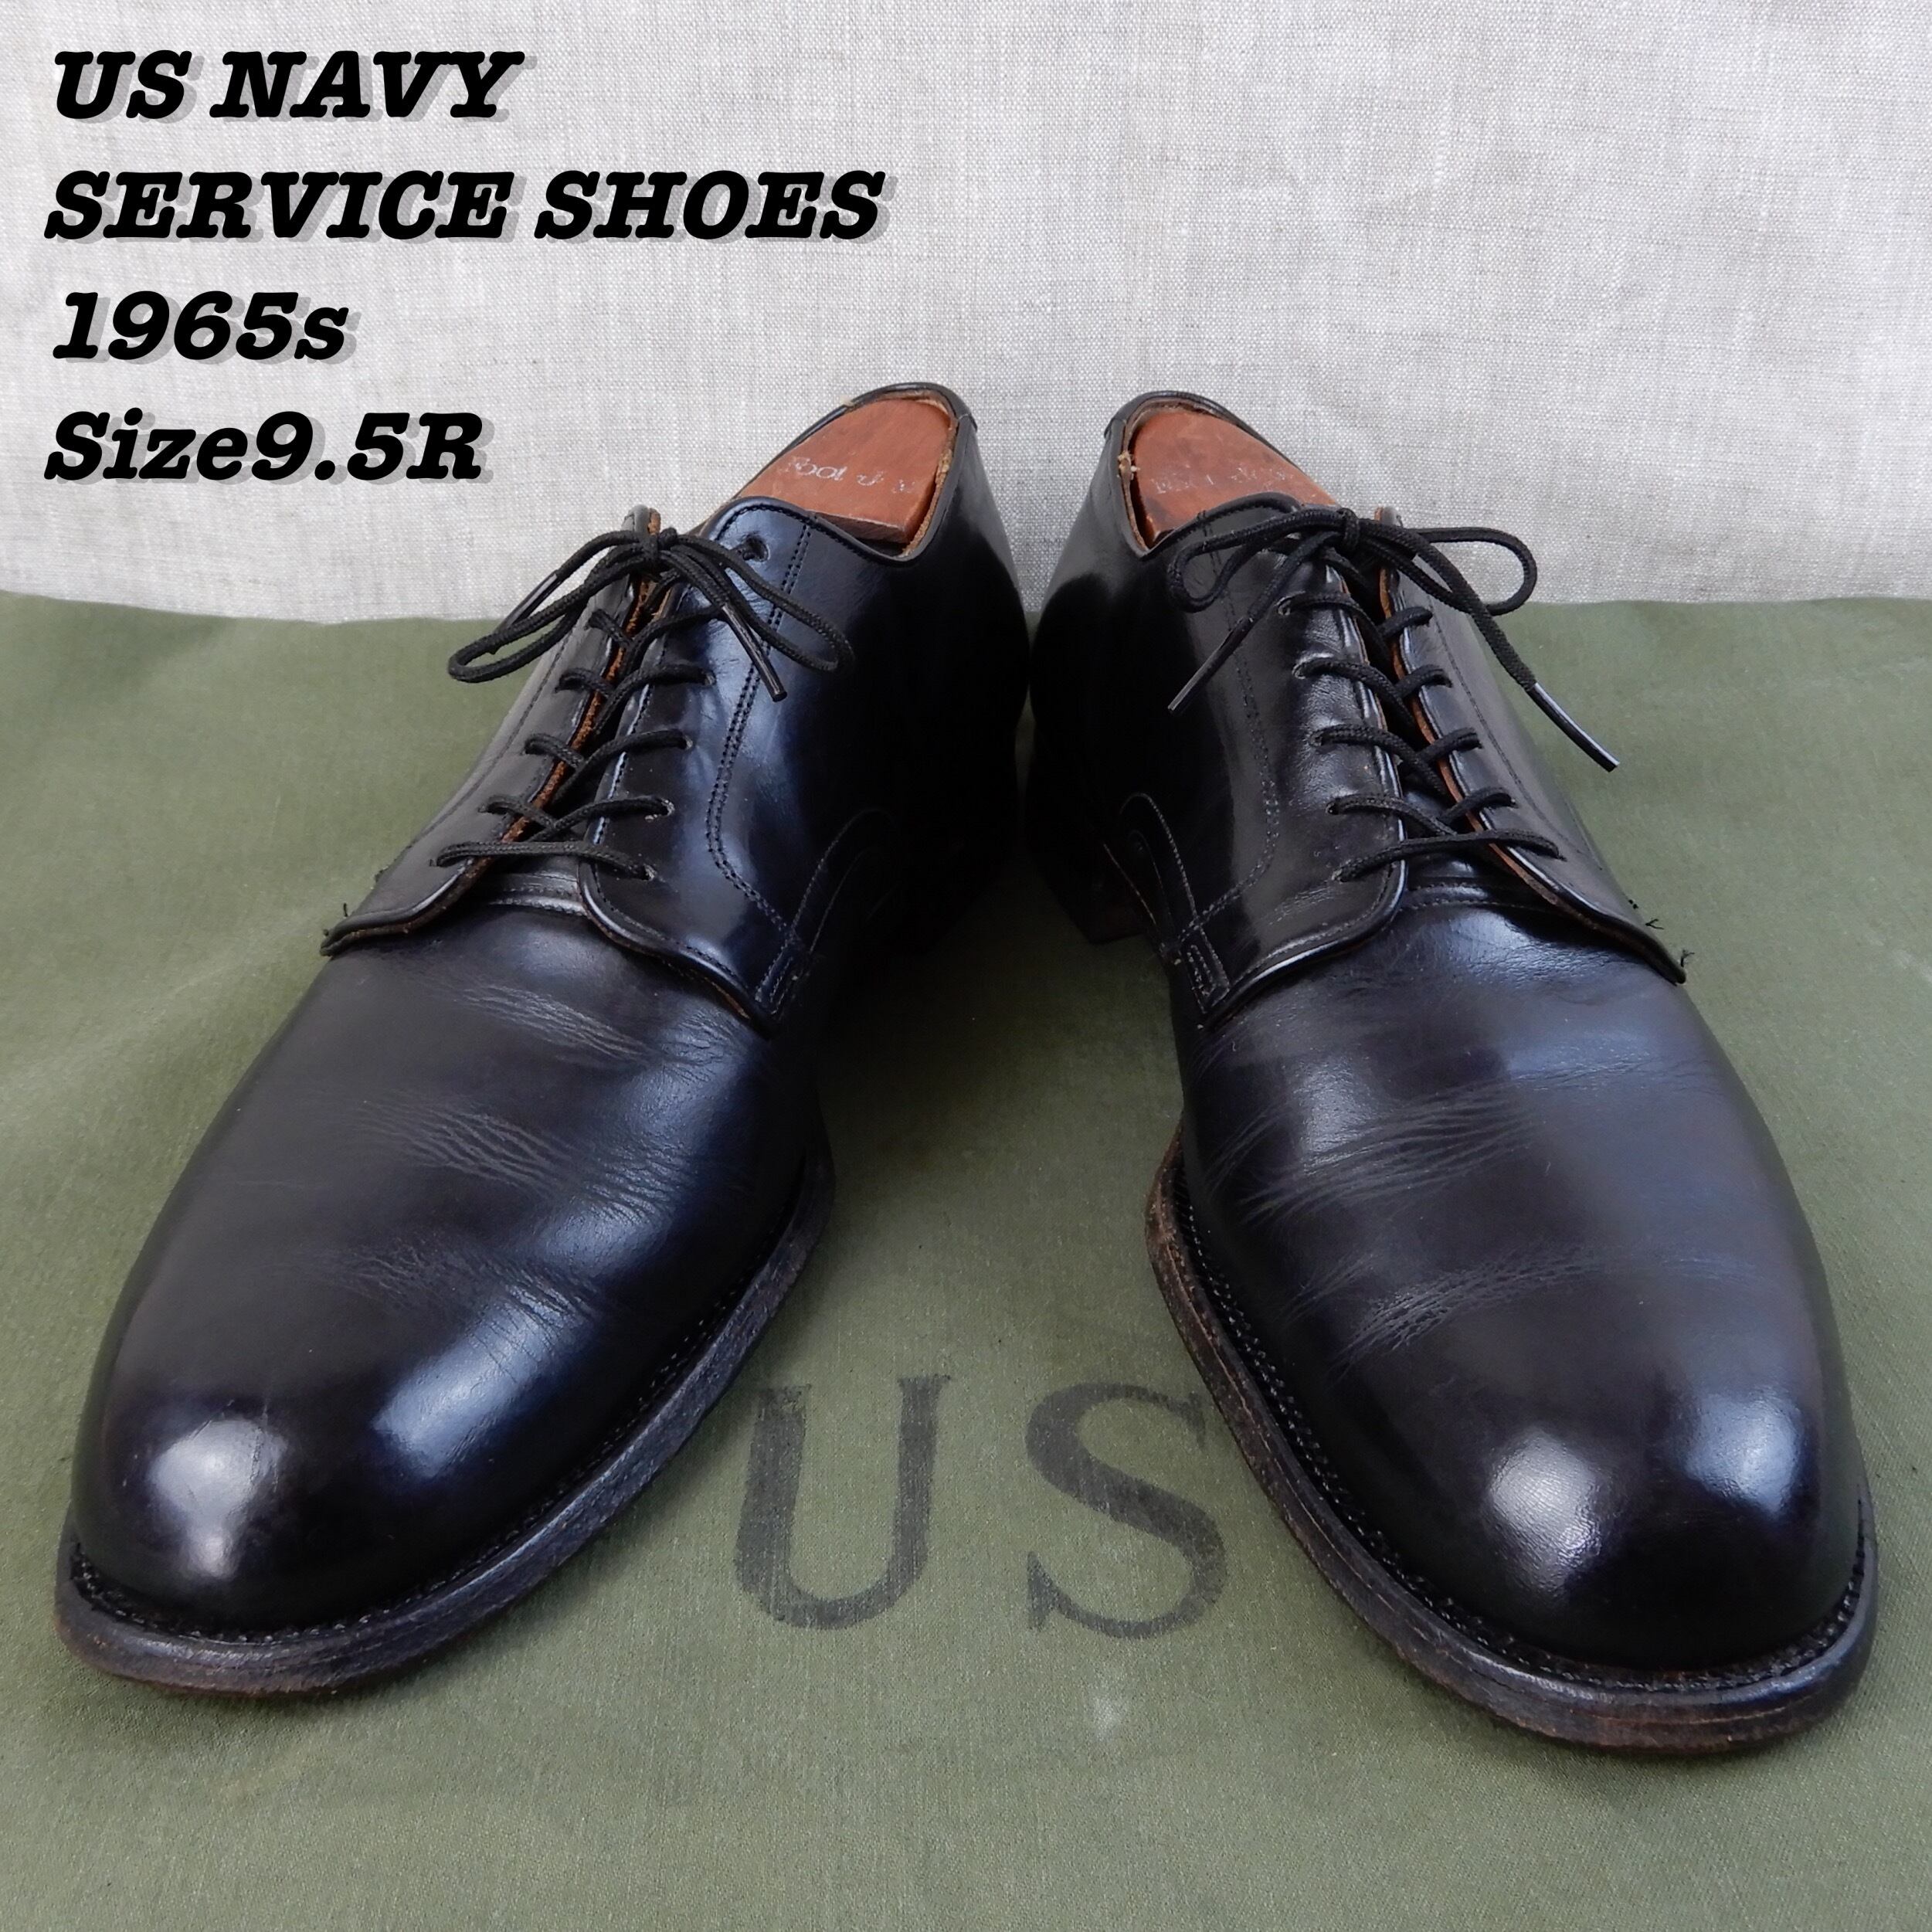 US NAVY SERVICE SHOES 1965s Size9.5R-